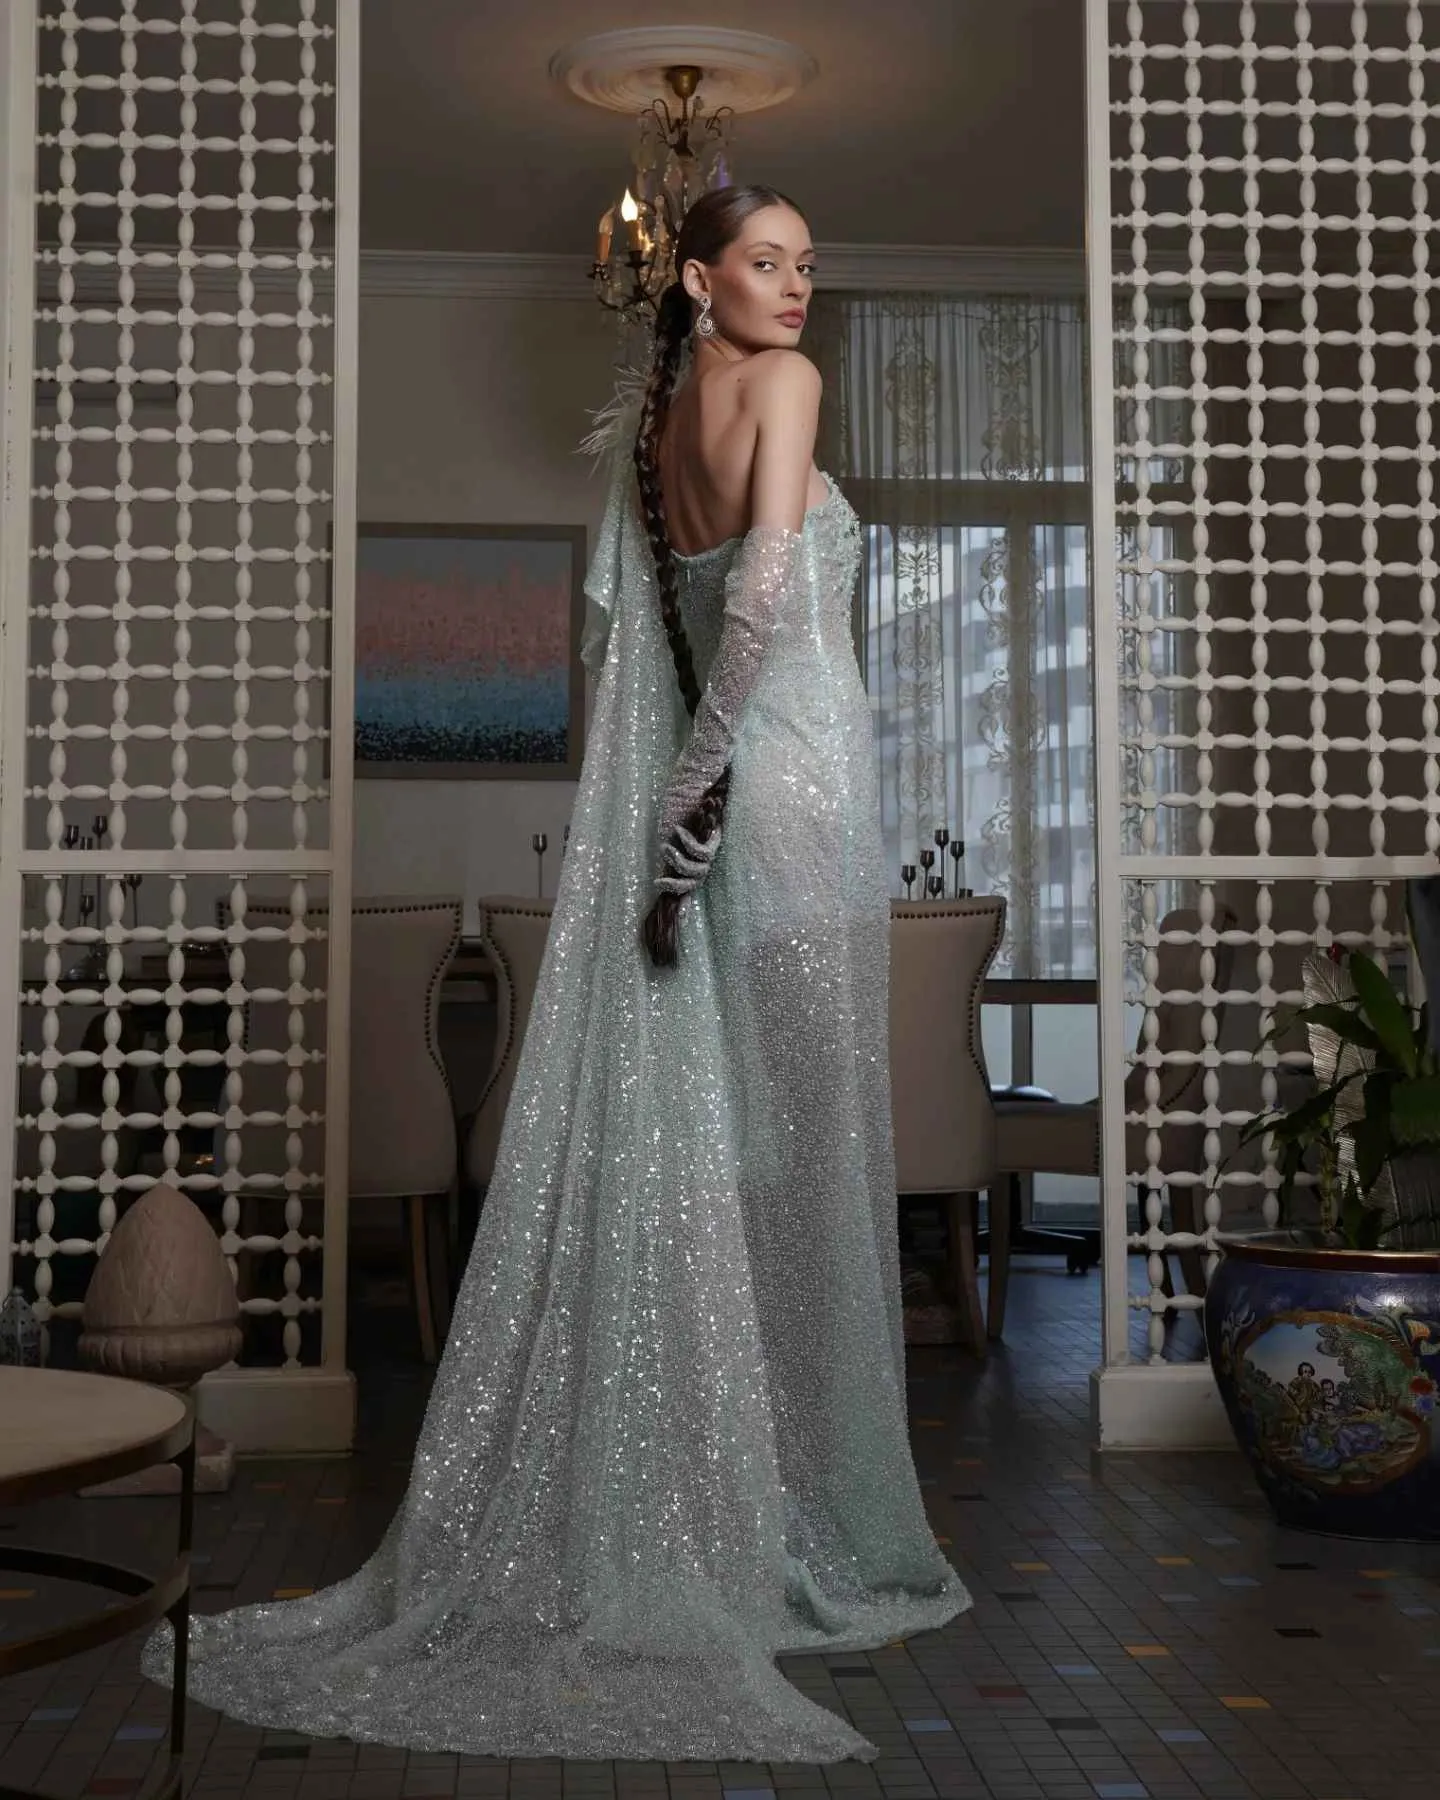 Unique Column Prom Dresses One-Shoulder Sleeveless Sweep Train Lace Feather Sequins Appliques Beaded Celebrity Evening Dresses Plus Size Custom Made L24643